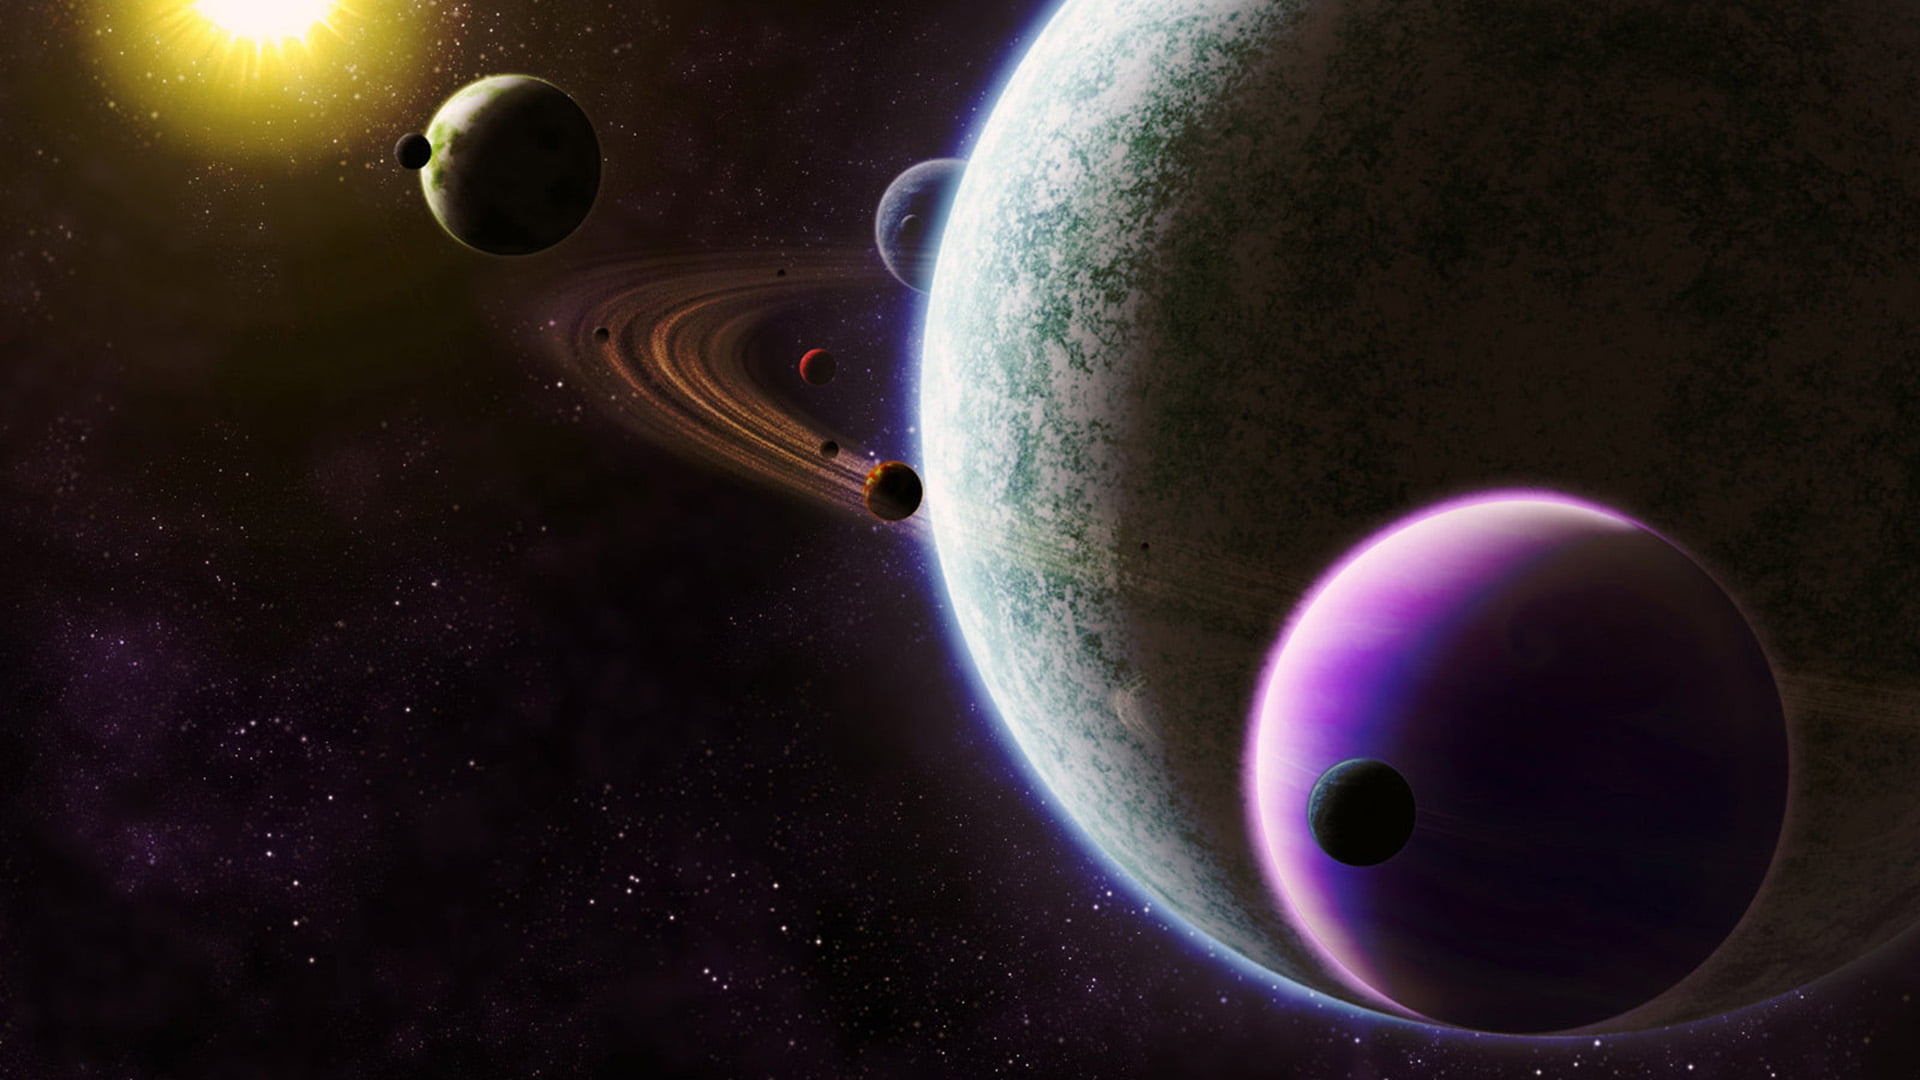 illustration of planets, space, planet, planetary rings, space art